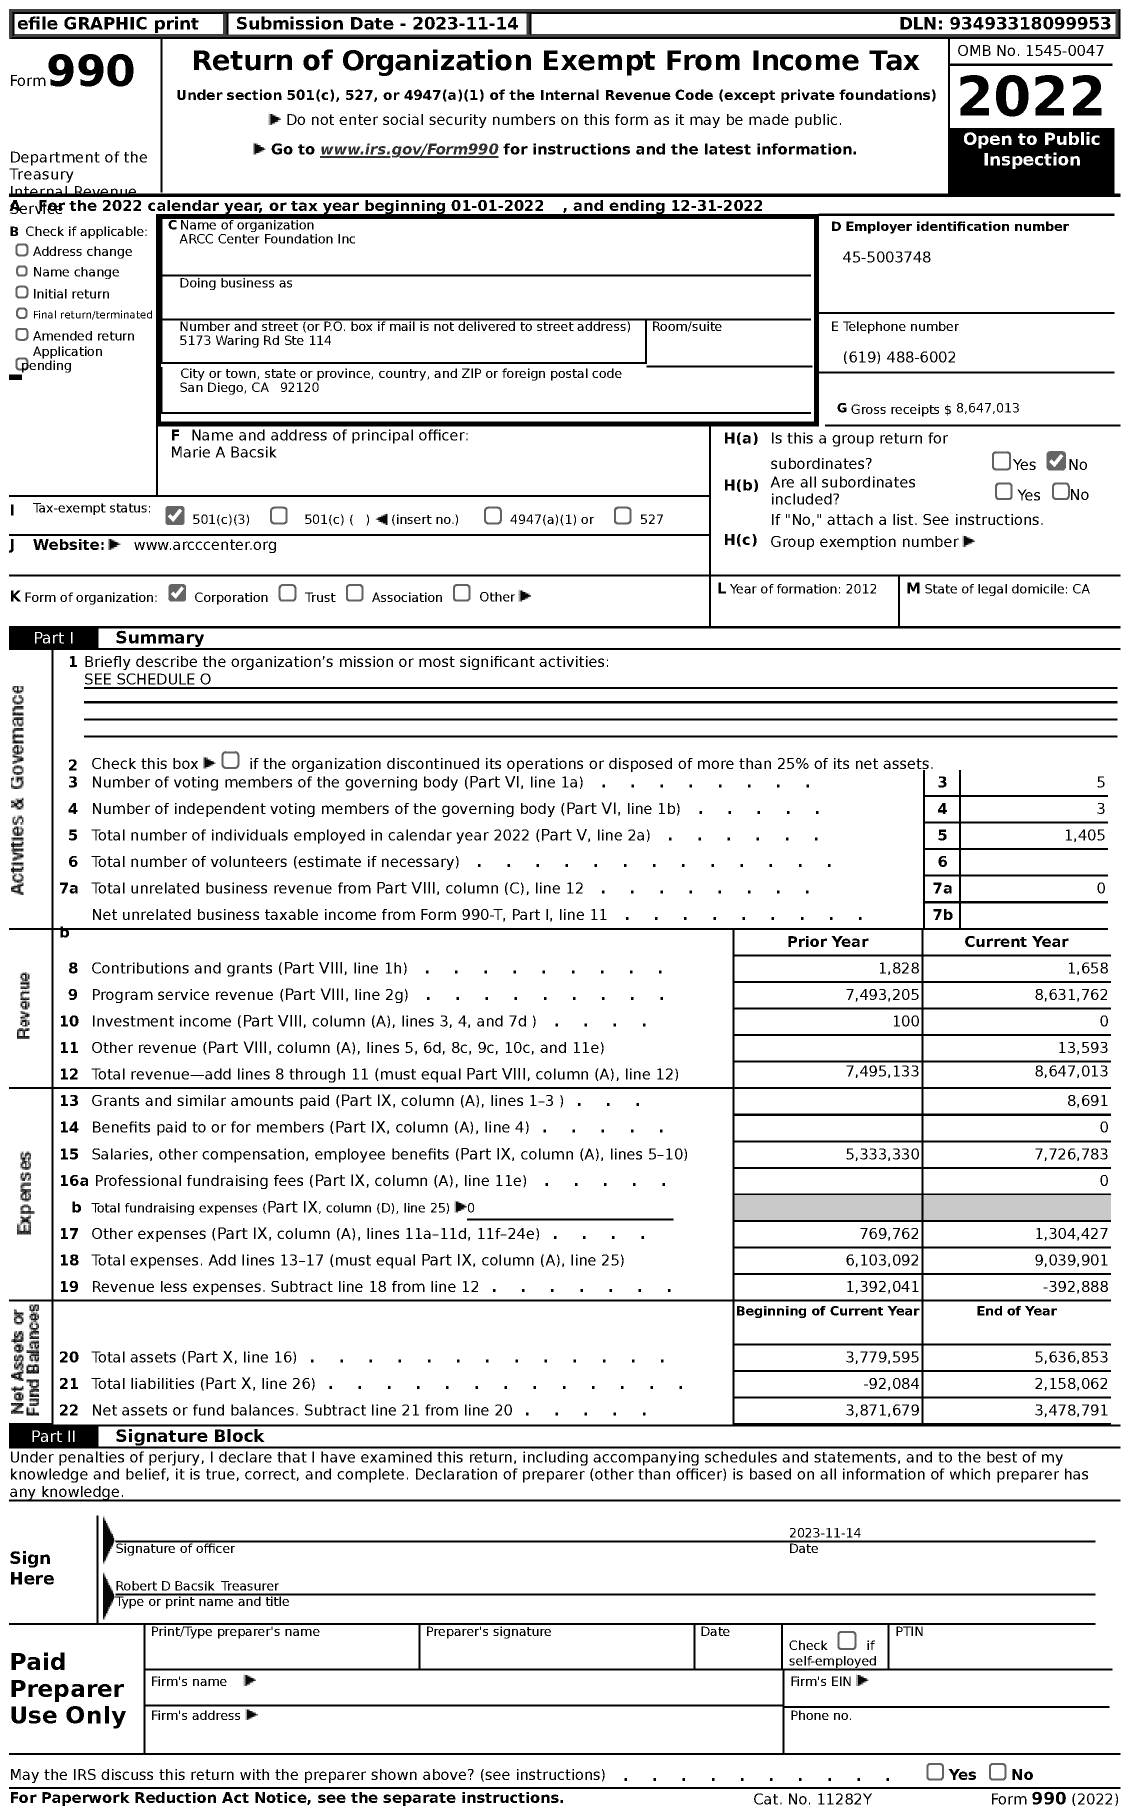 Image of first page of 2022 Form 990 for ARCC Center Foundation